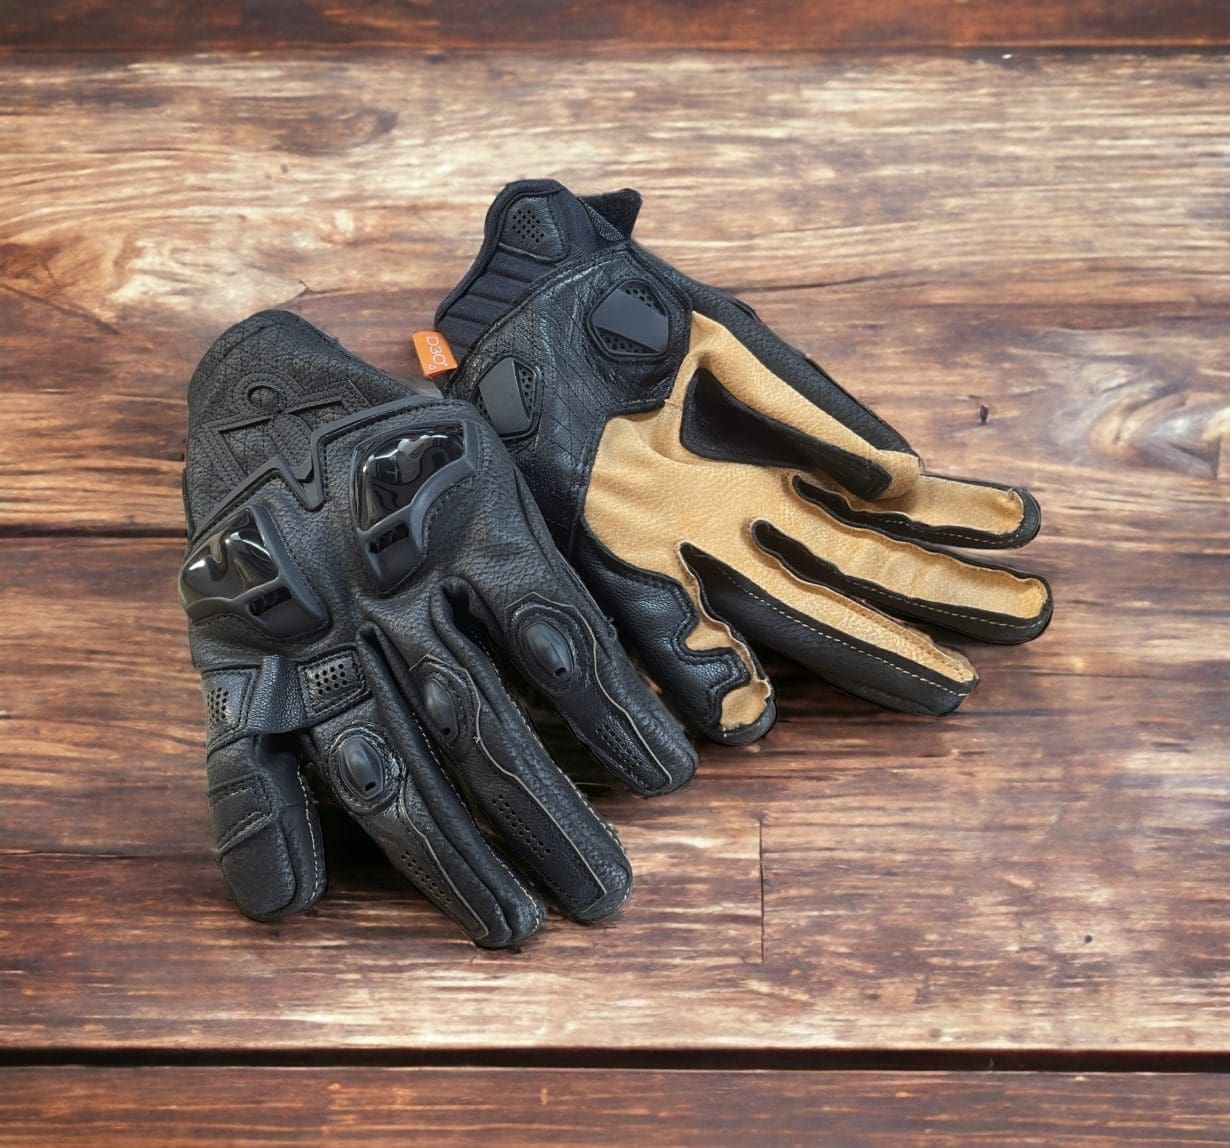 Hypersport Short Motorcycle Gloves from manufacturer Icon.